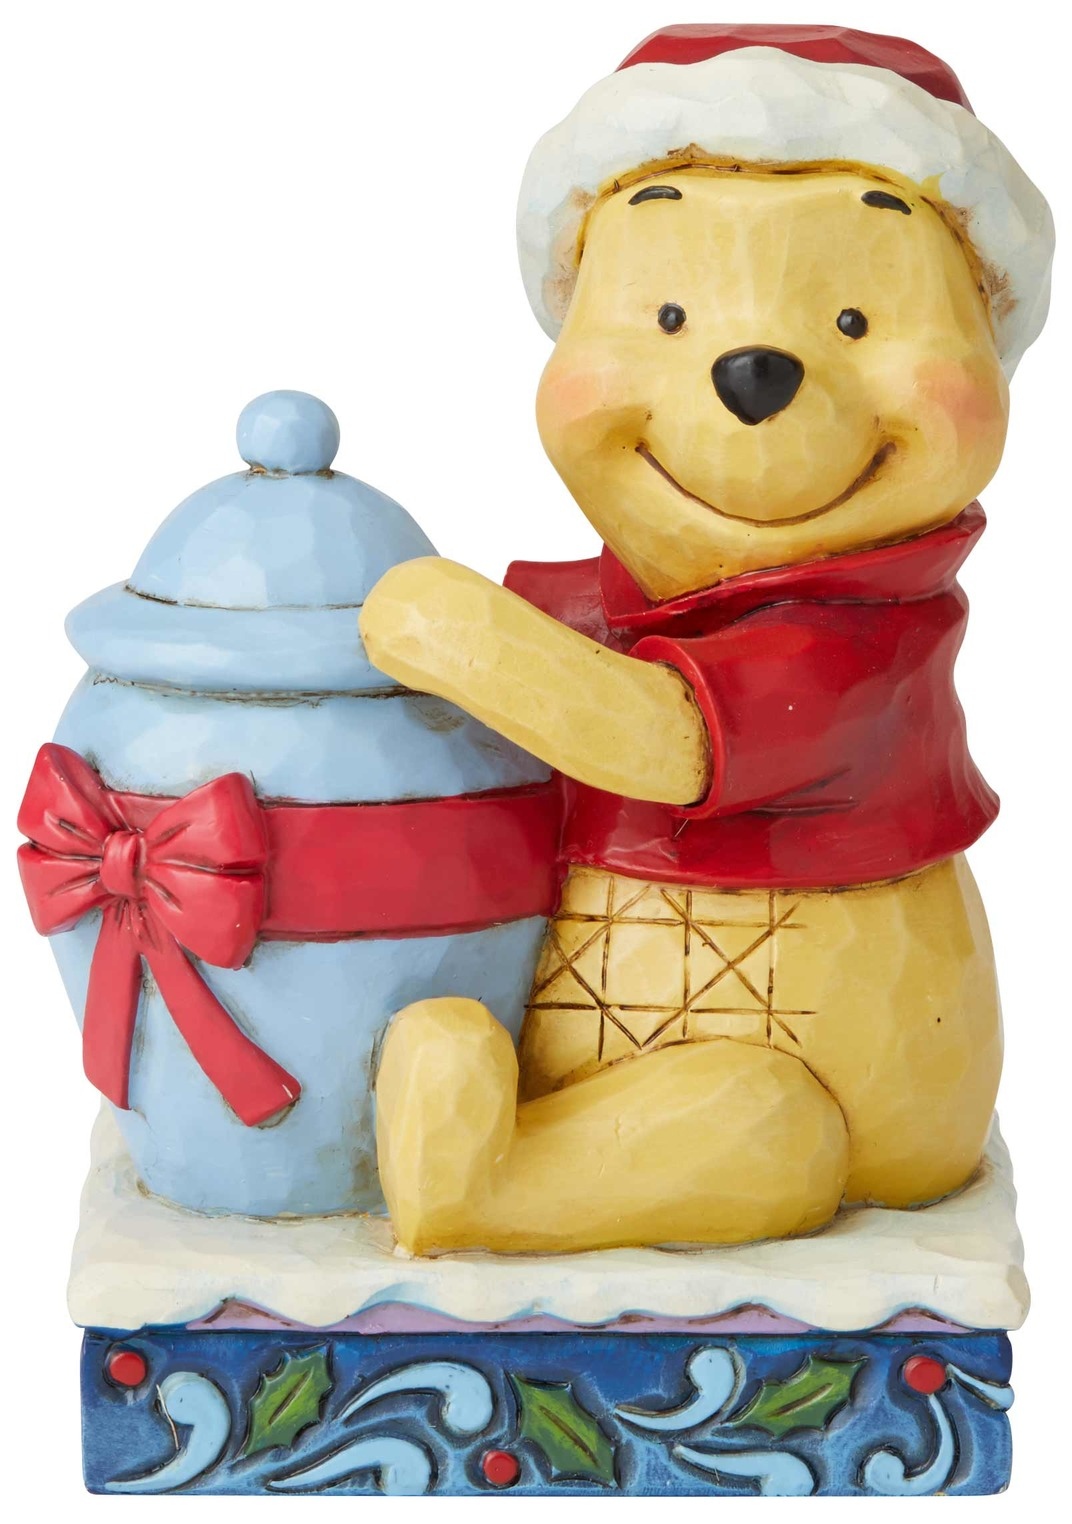 Special Sale SALE6002845 Disney Traditions by Jim Shore 6002845 Pooh Christmas Personality Pose